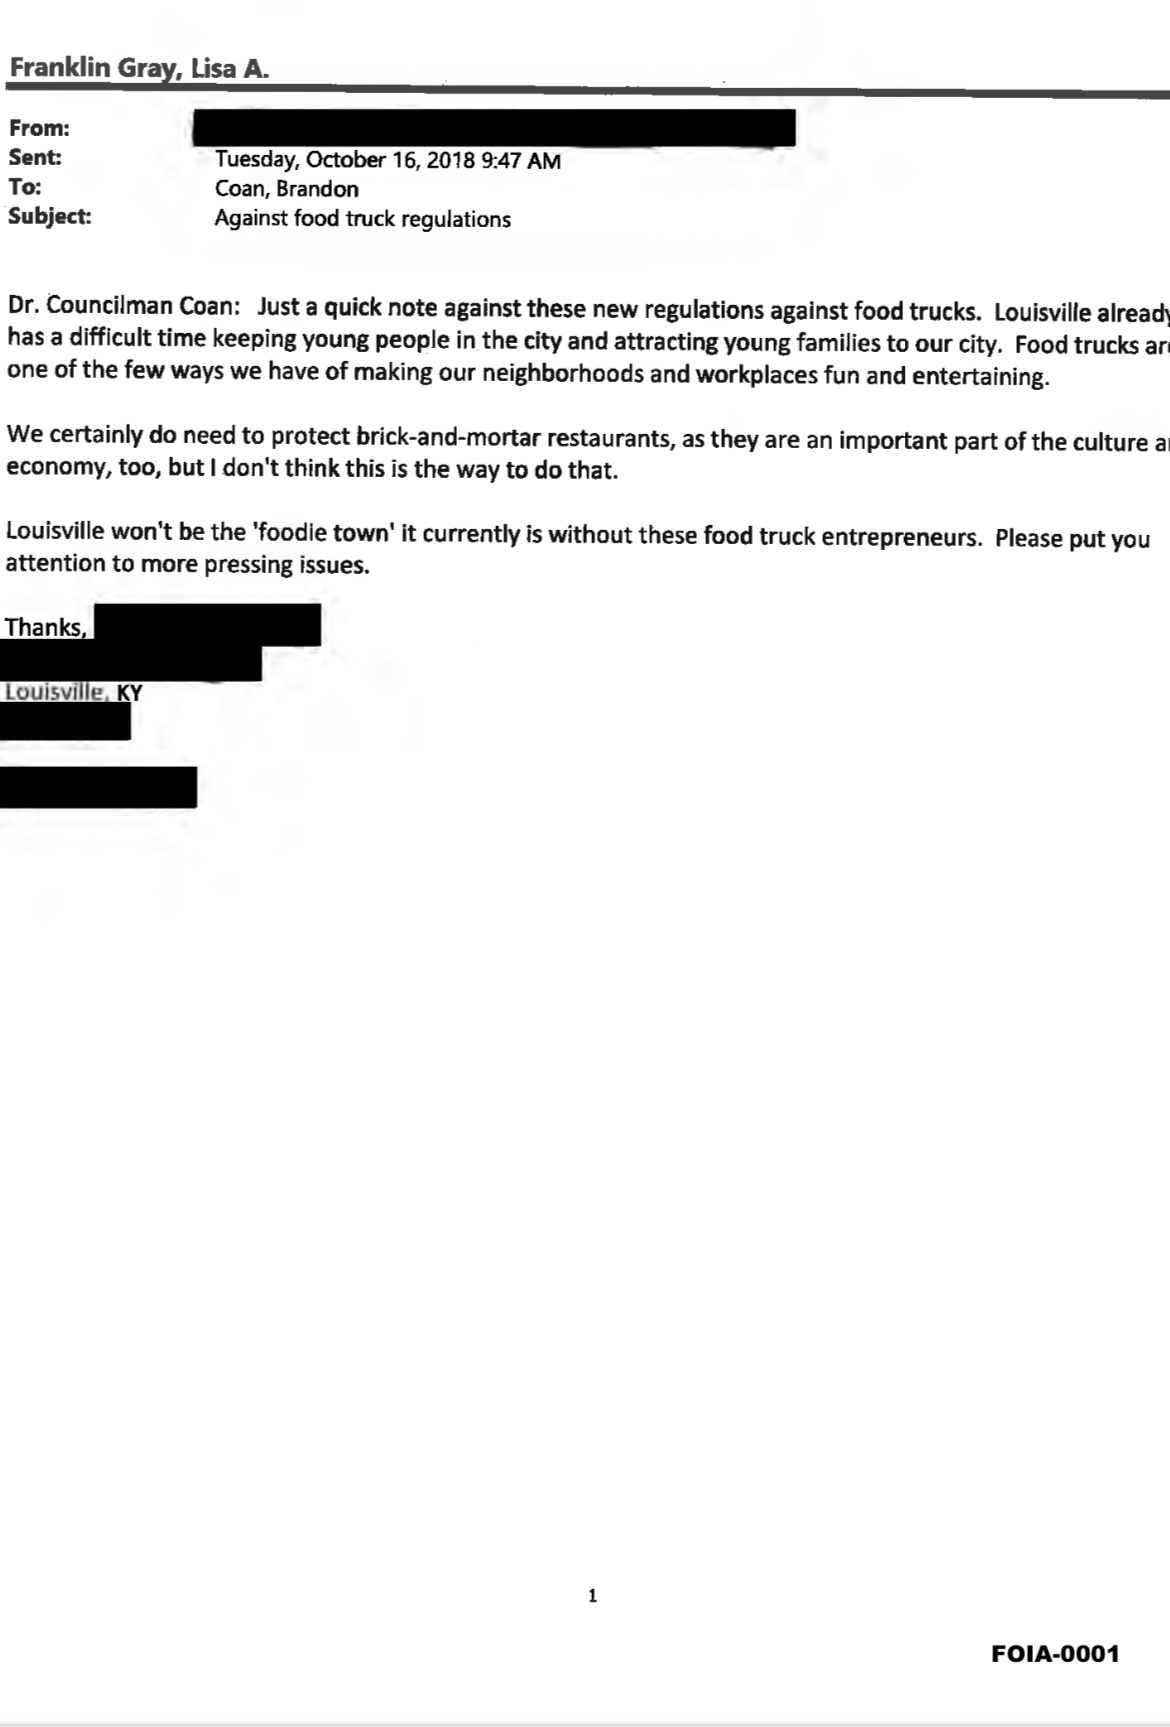 Redacted email obtained by the Institute for Justice